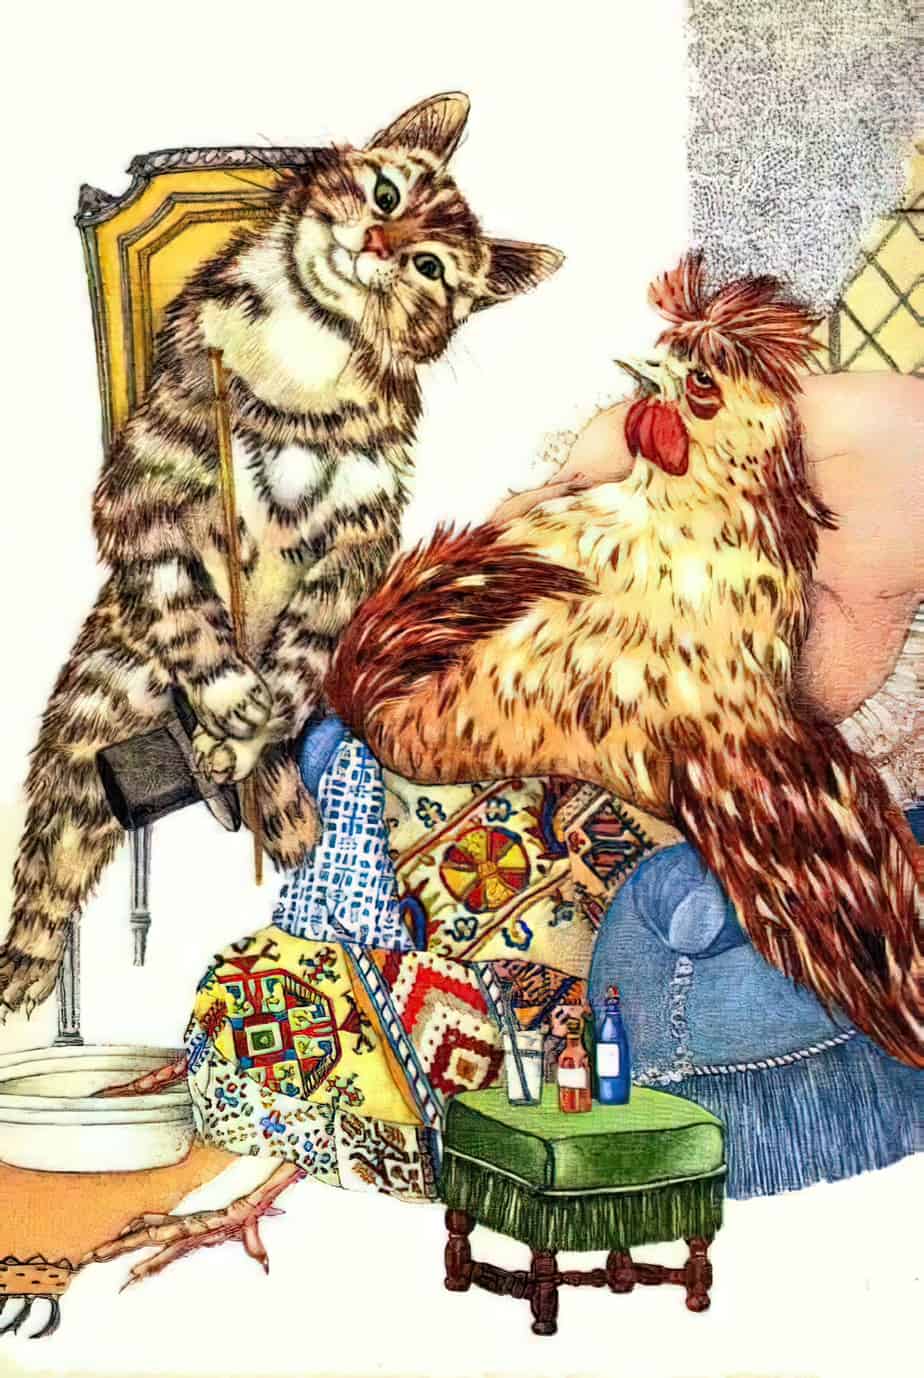 The Cat and the Sick Chicken illustrated by Adrienne Segur, found in My Big Book of Cat Stories published 1967